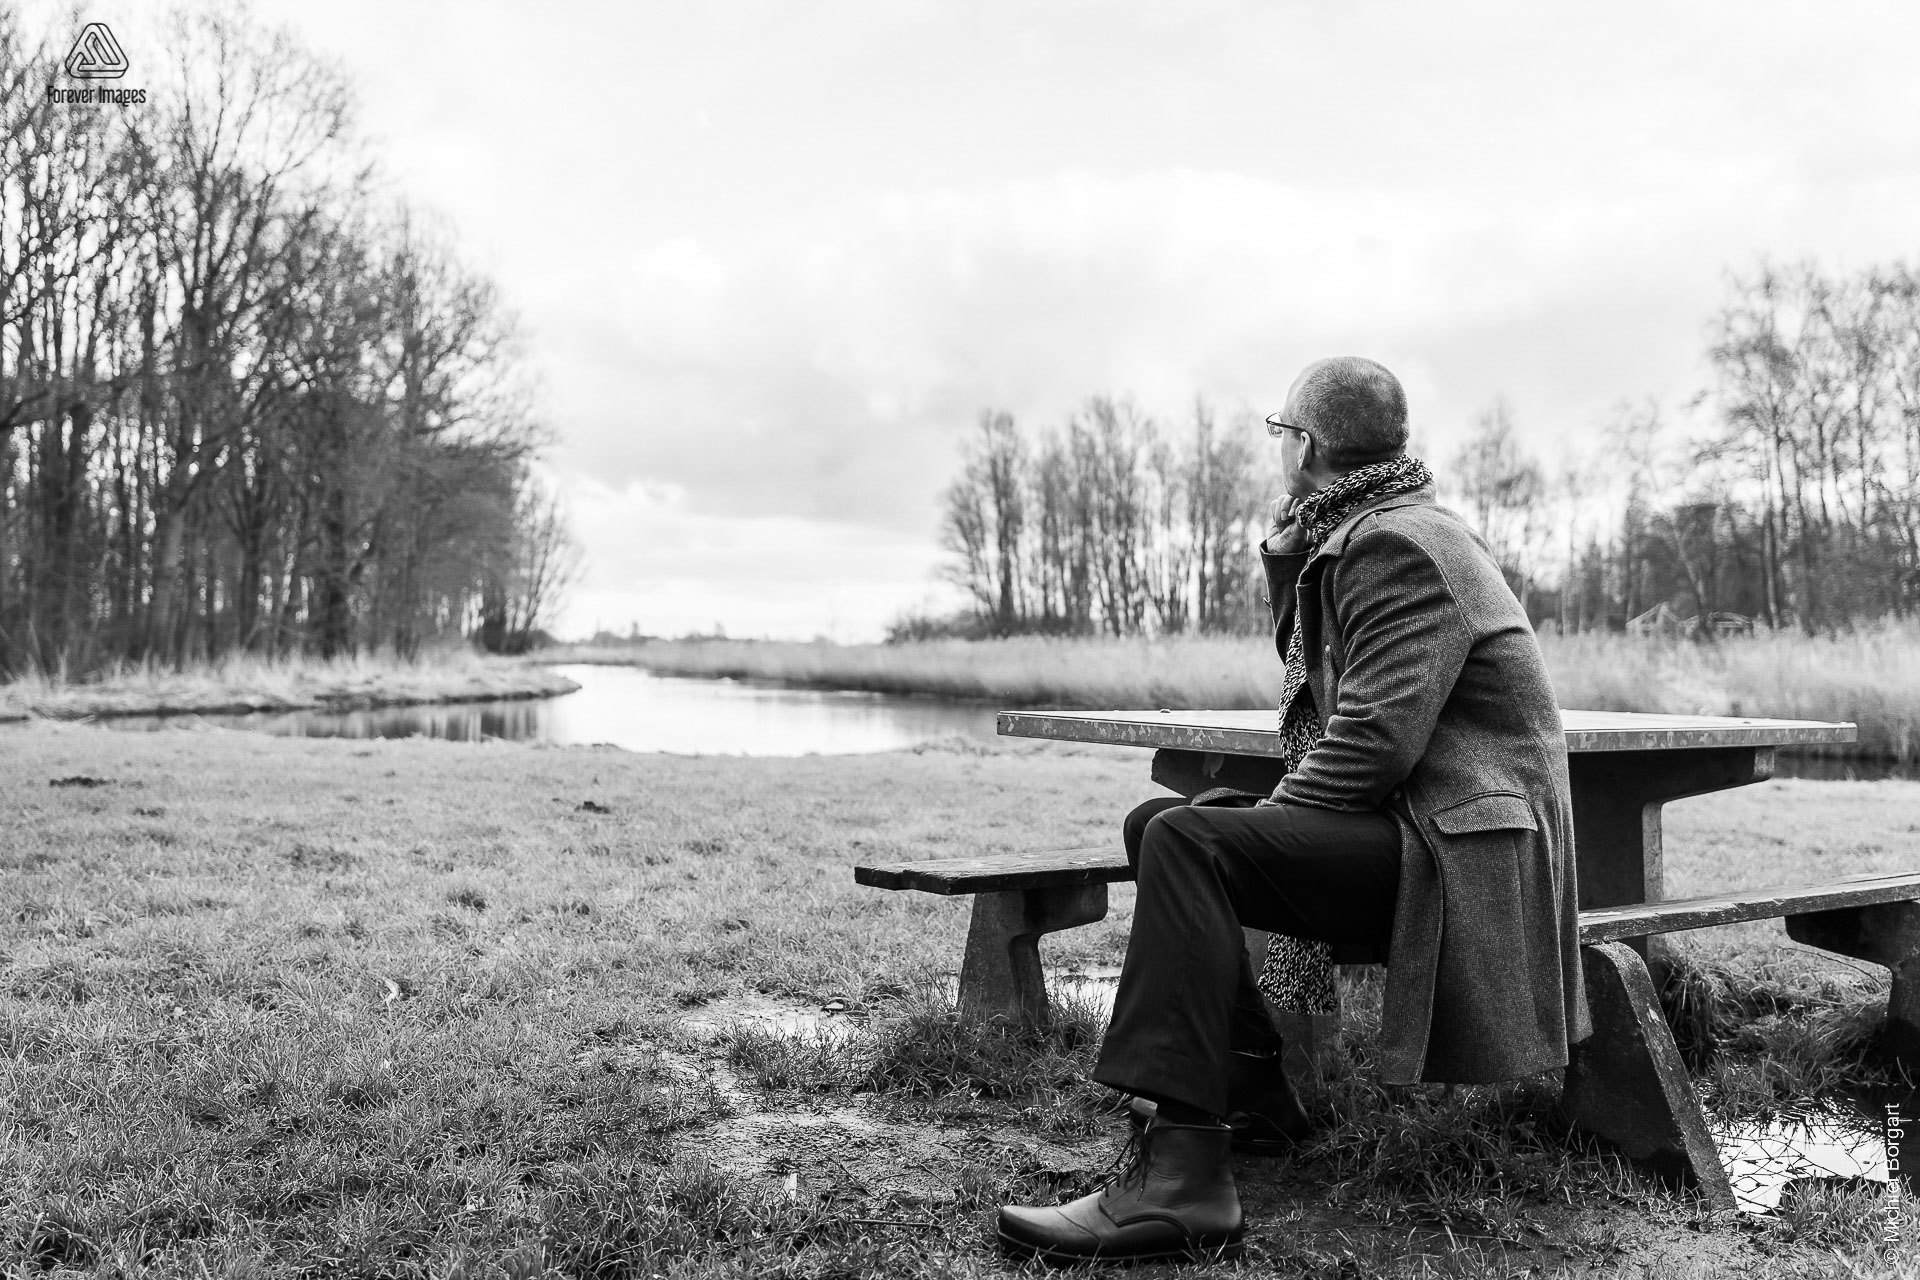 Portrait photo black and white B&W man sitting in park looking out over water | Robin Het Twiske De Stootersplas | Portrait Photographer Michiel Borgart - Forever Images.